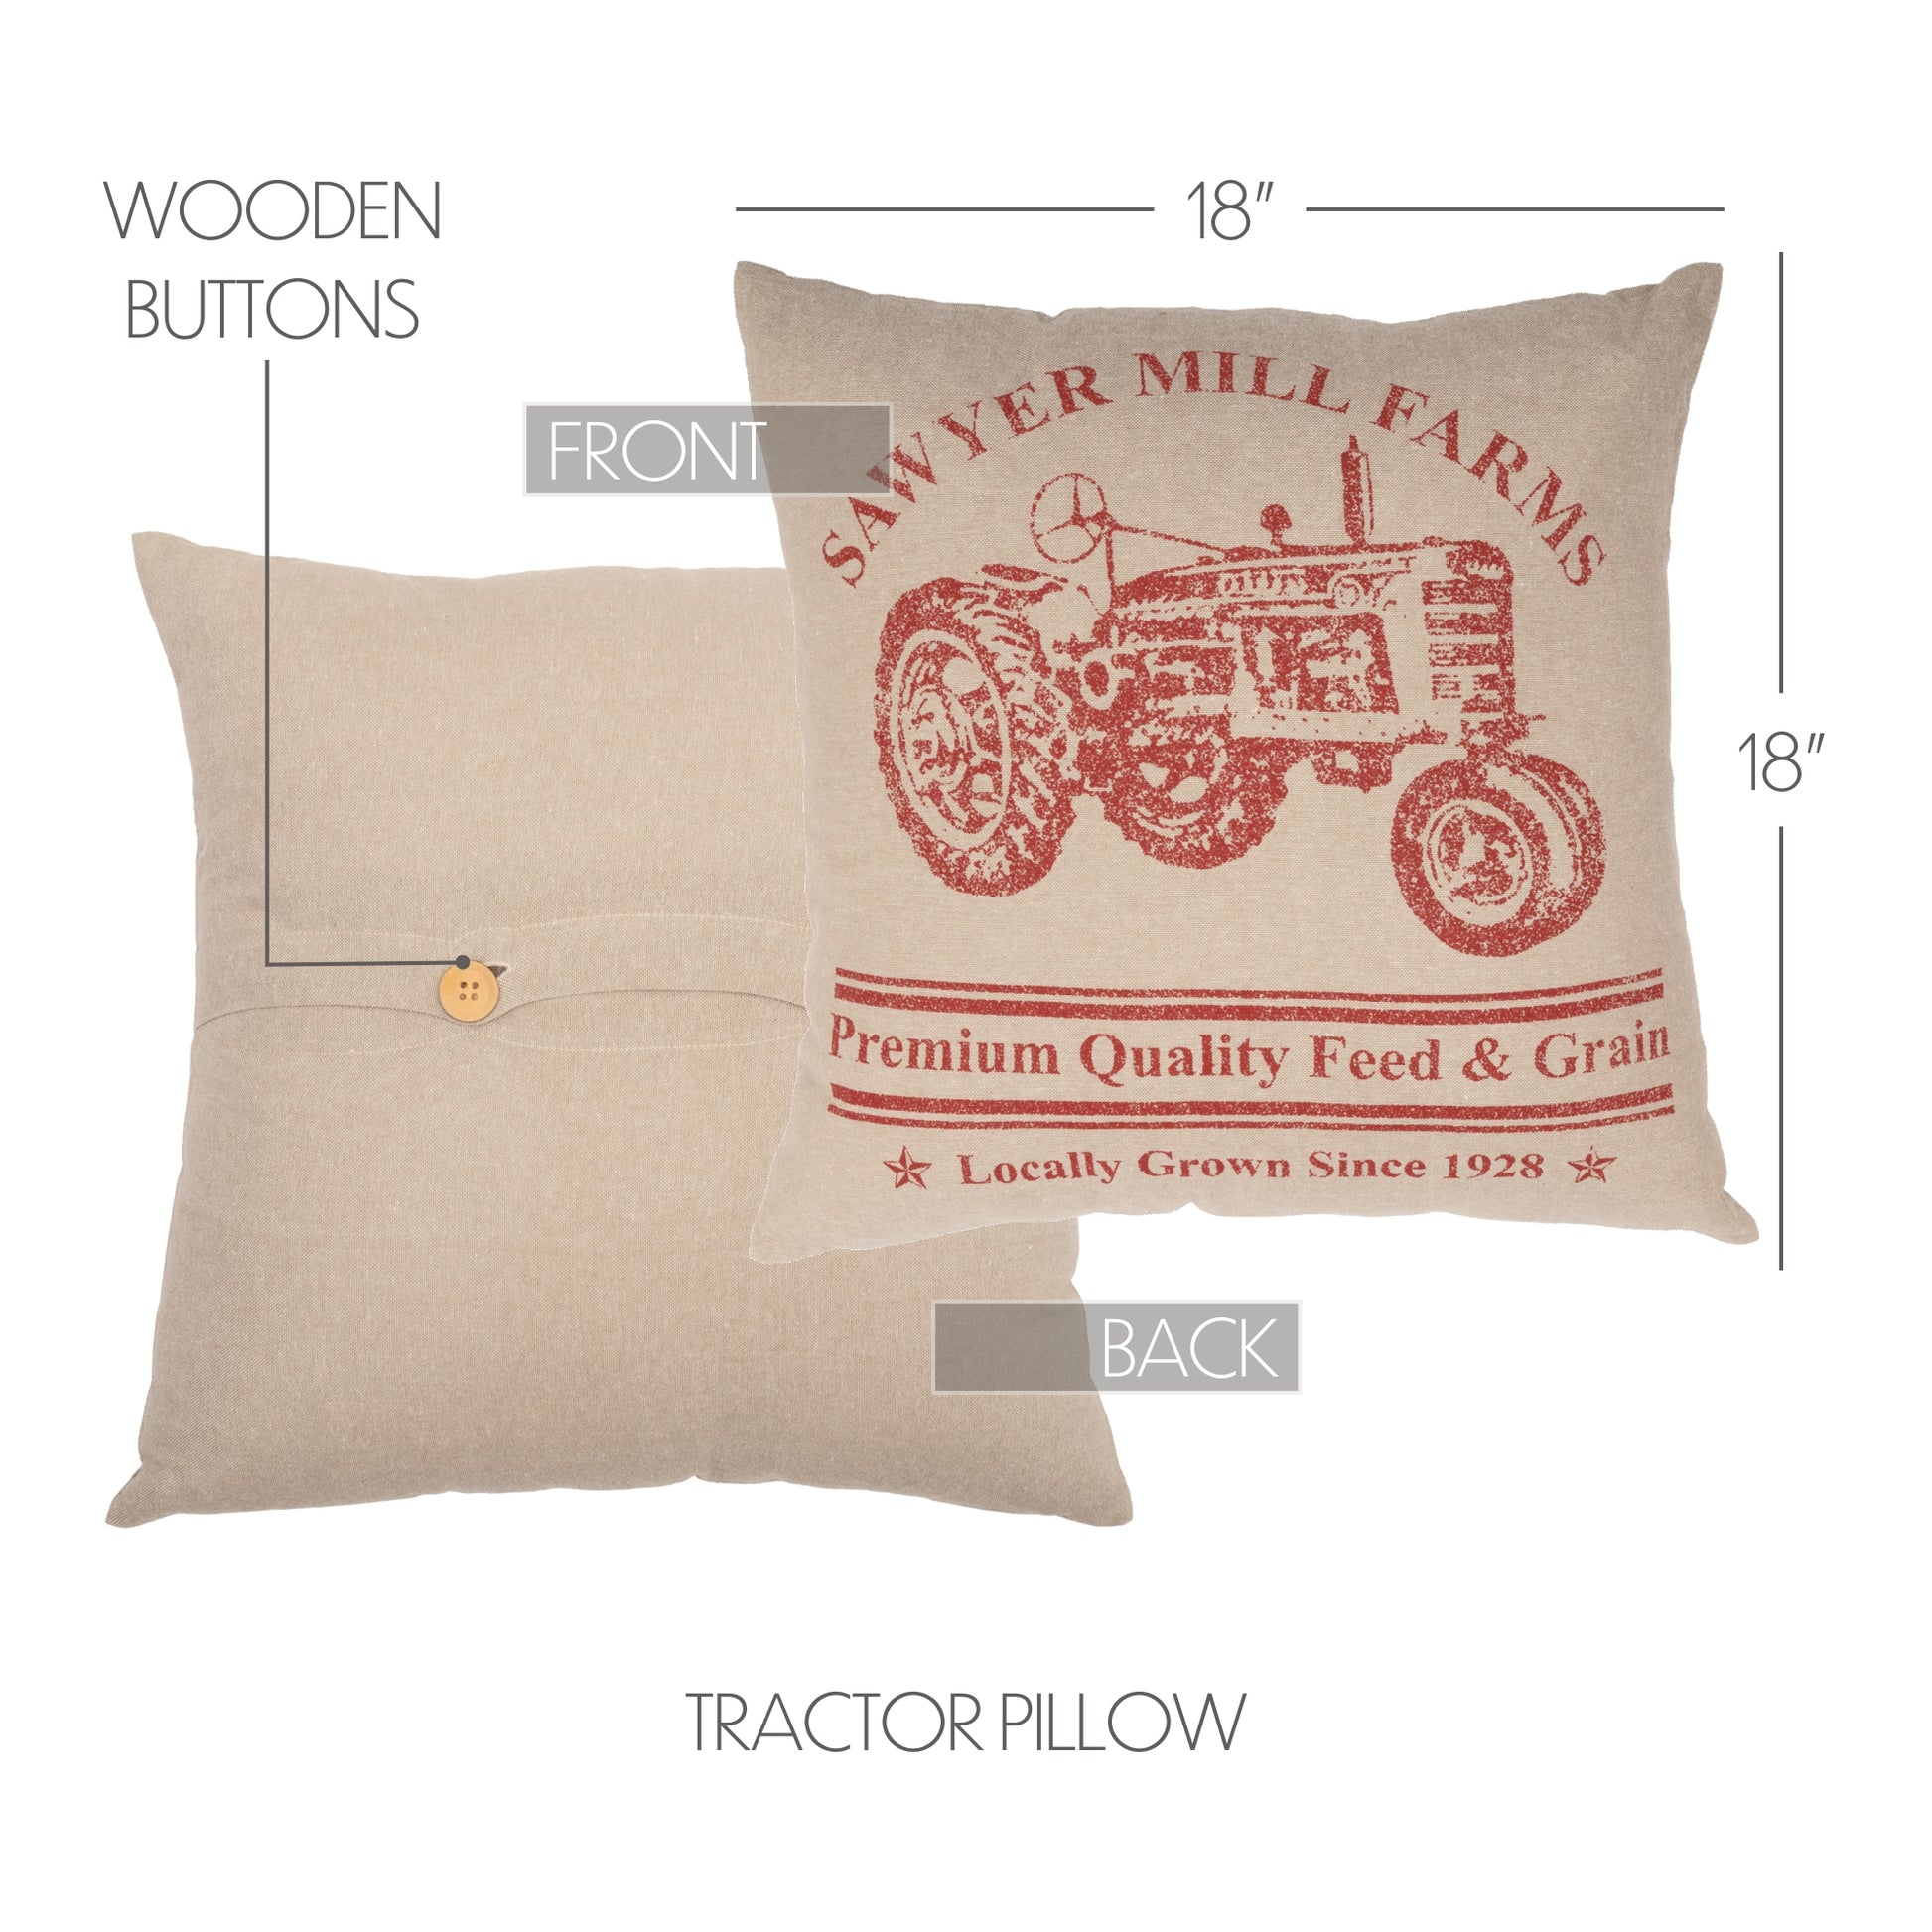 51325-Sawyer-Mill-Red-Tractor-Pillow-18x18-image-1